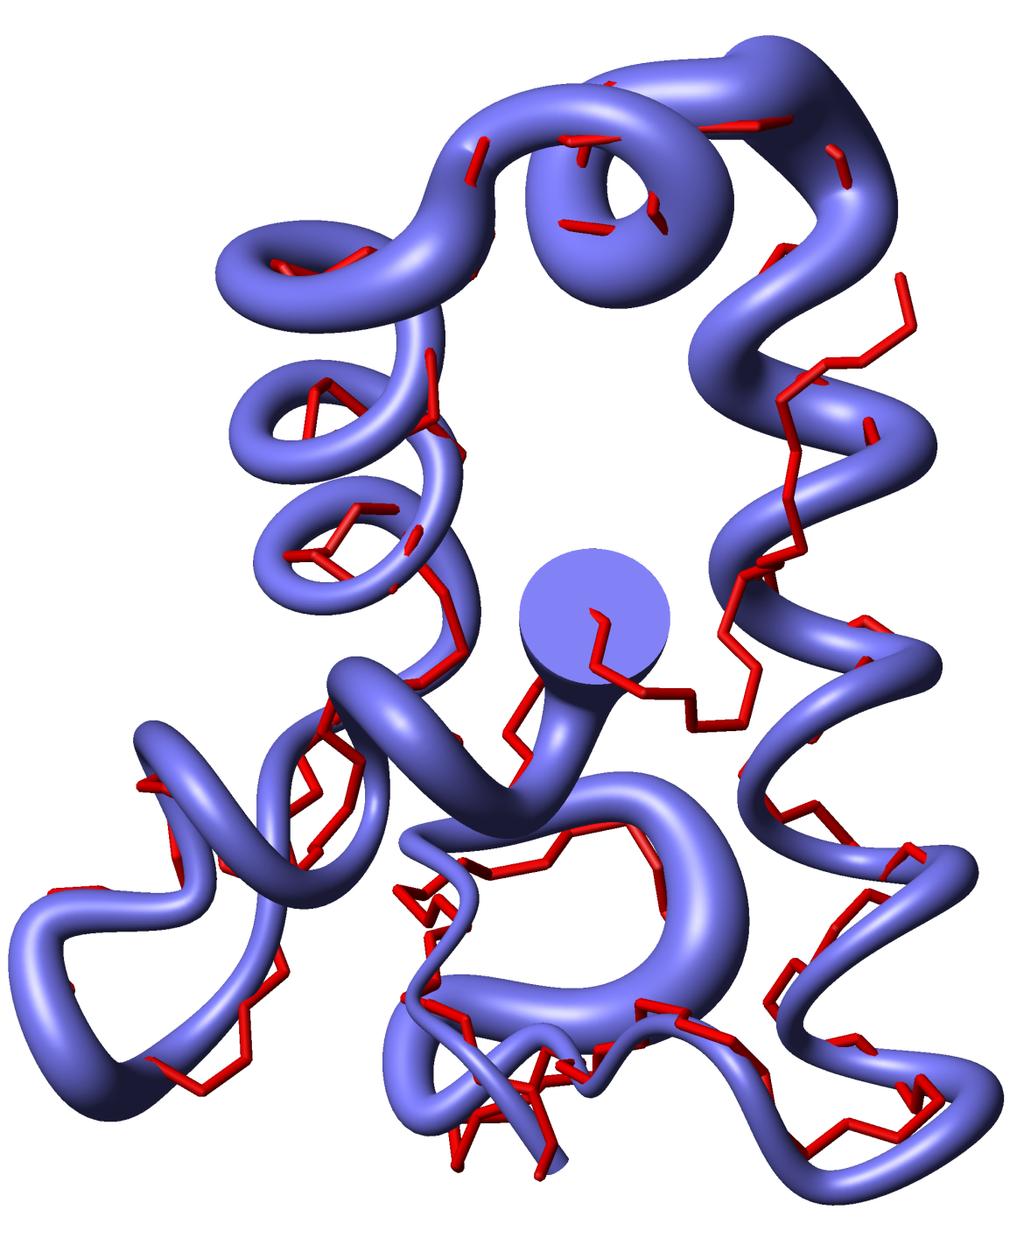 was then used for a CYANA 57 structure calculation using residues 44-116. 200 calculations where performed. Residues 44-49 formed a disordered region.